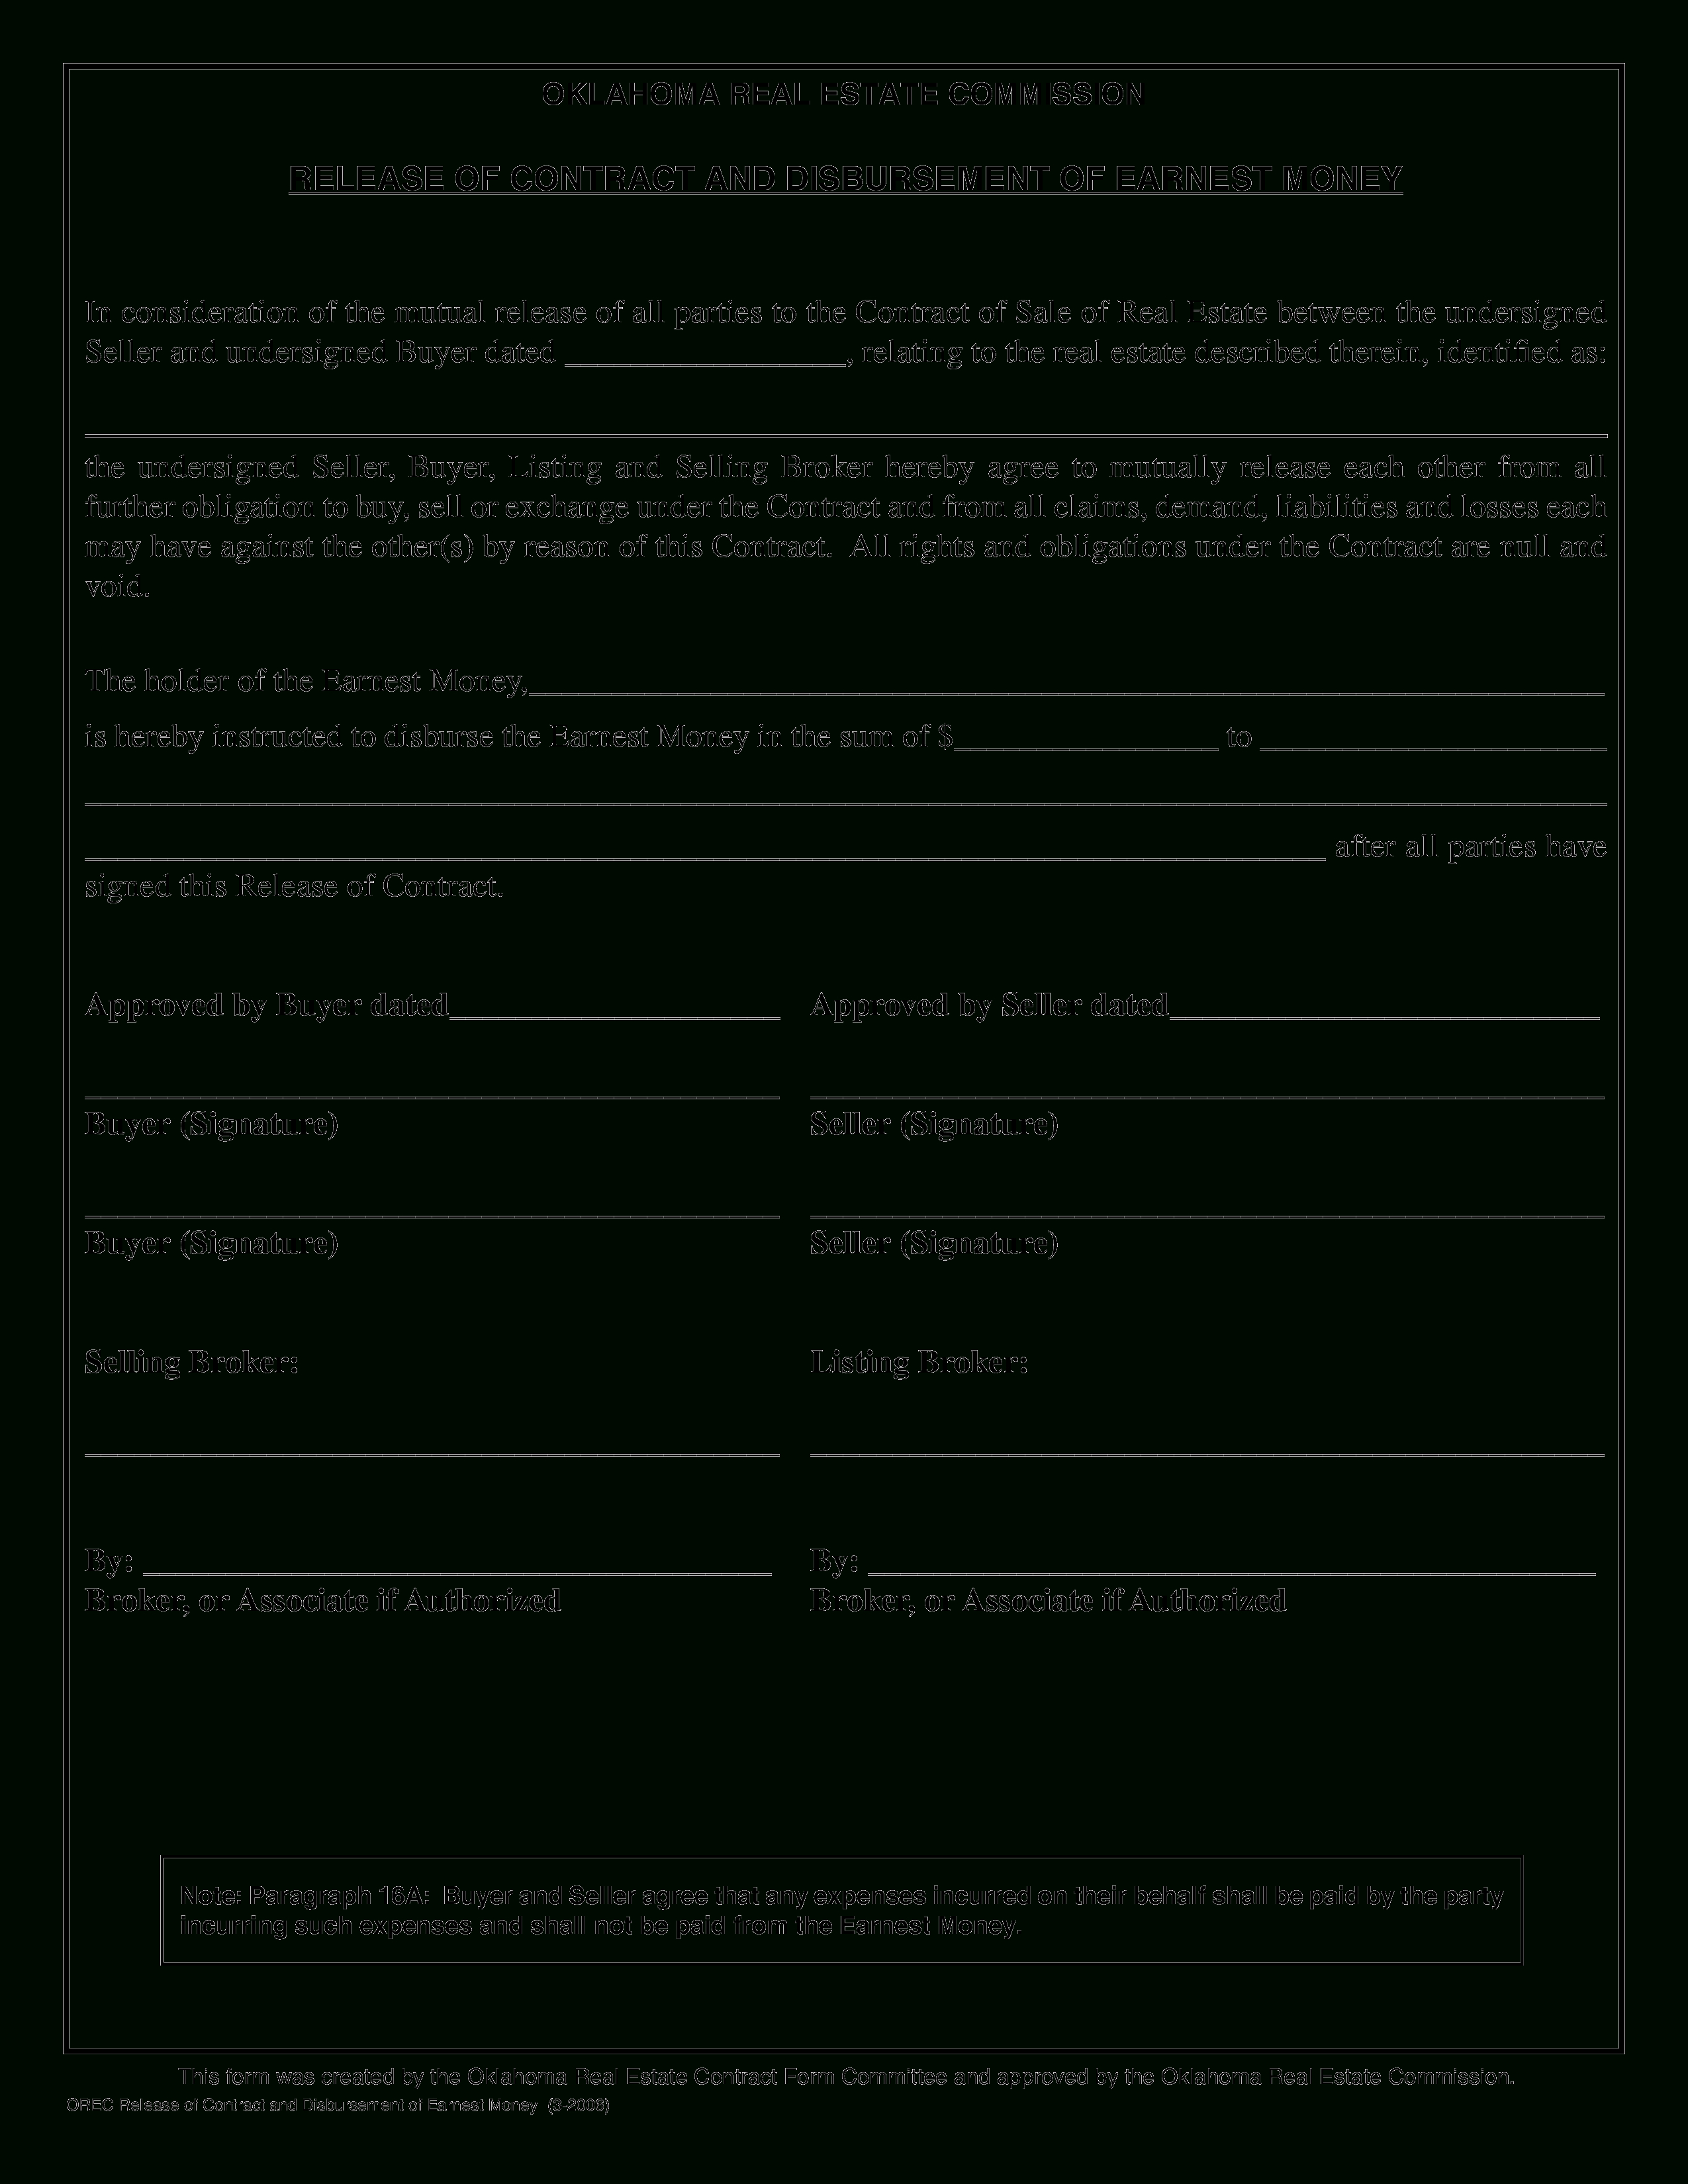 Free Real Estate Contract Release Form | Templates At - Free Printable Real Estate Contracts